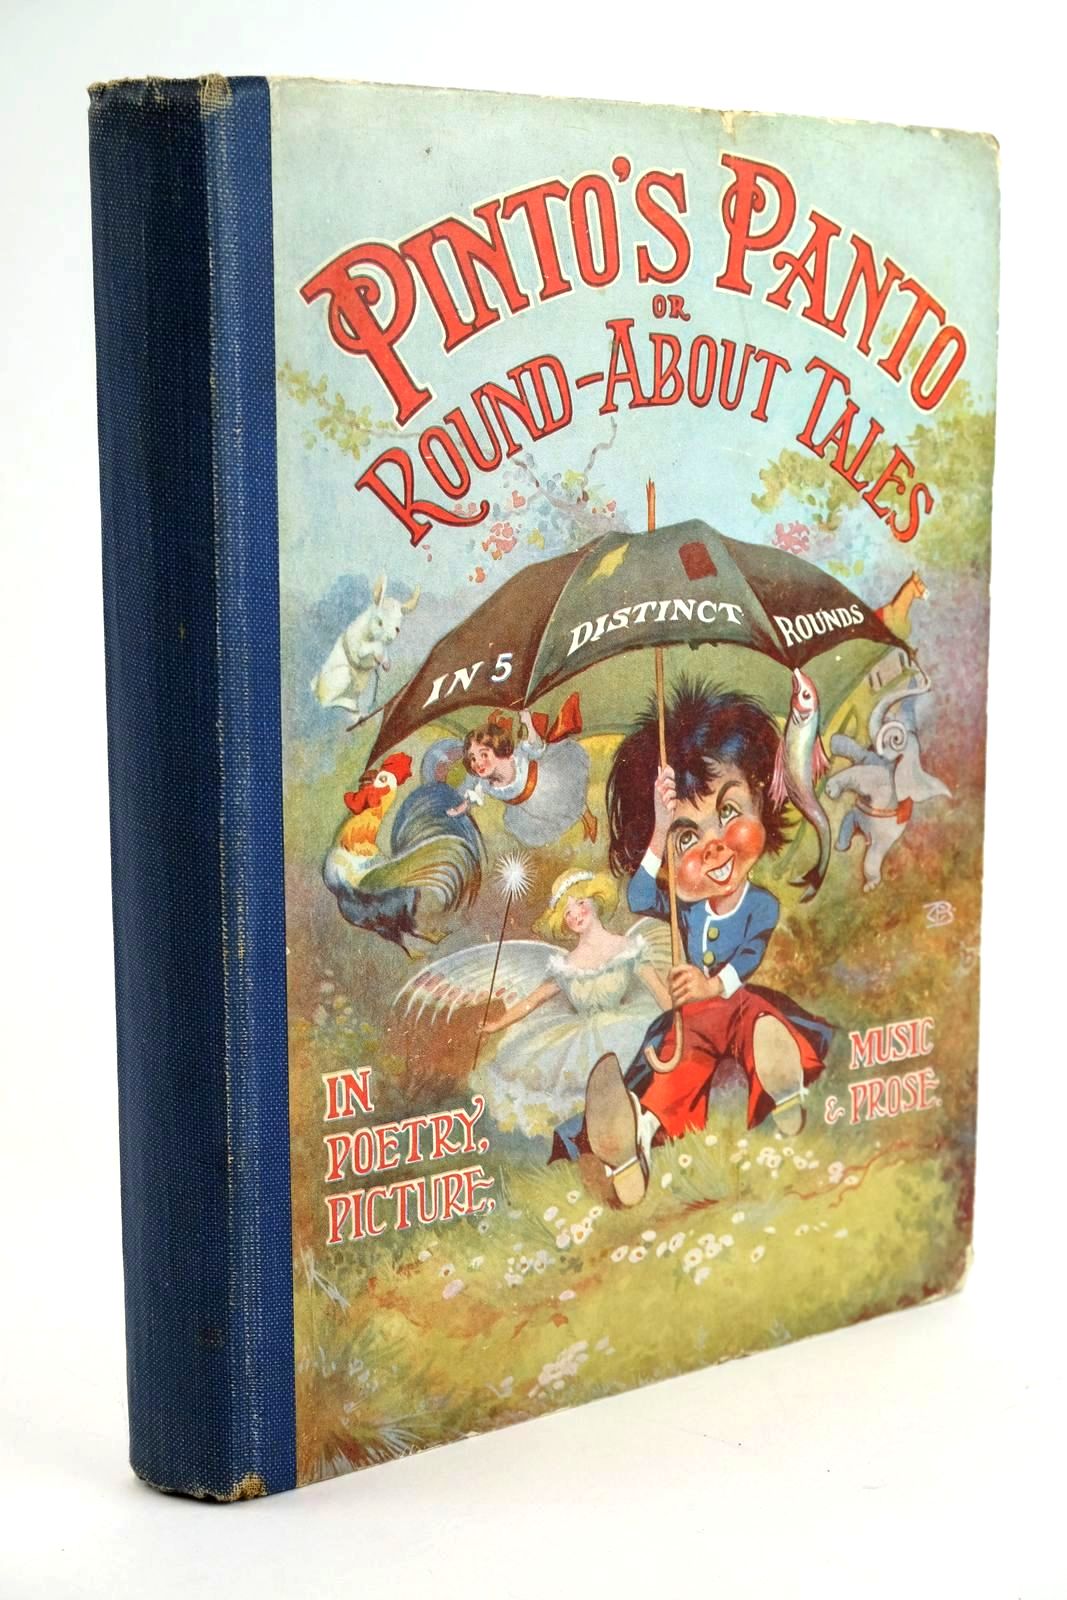 Photo of PINTO'S PANTO OR ROUND-ABOUT TALES IN POETRY, MUSIC, PICTURE & PROSE- Stock Number: 1323385